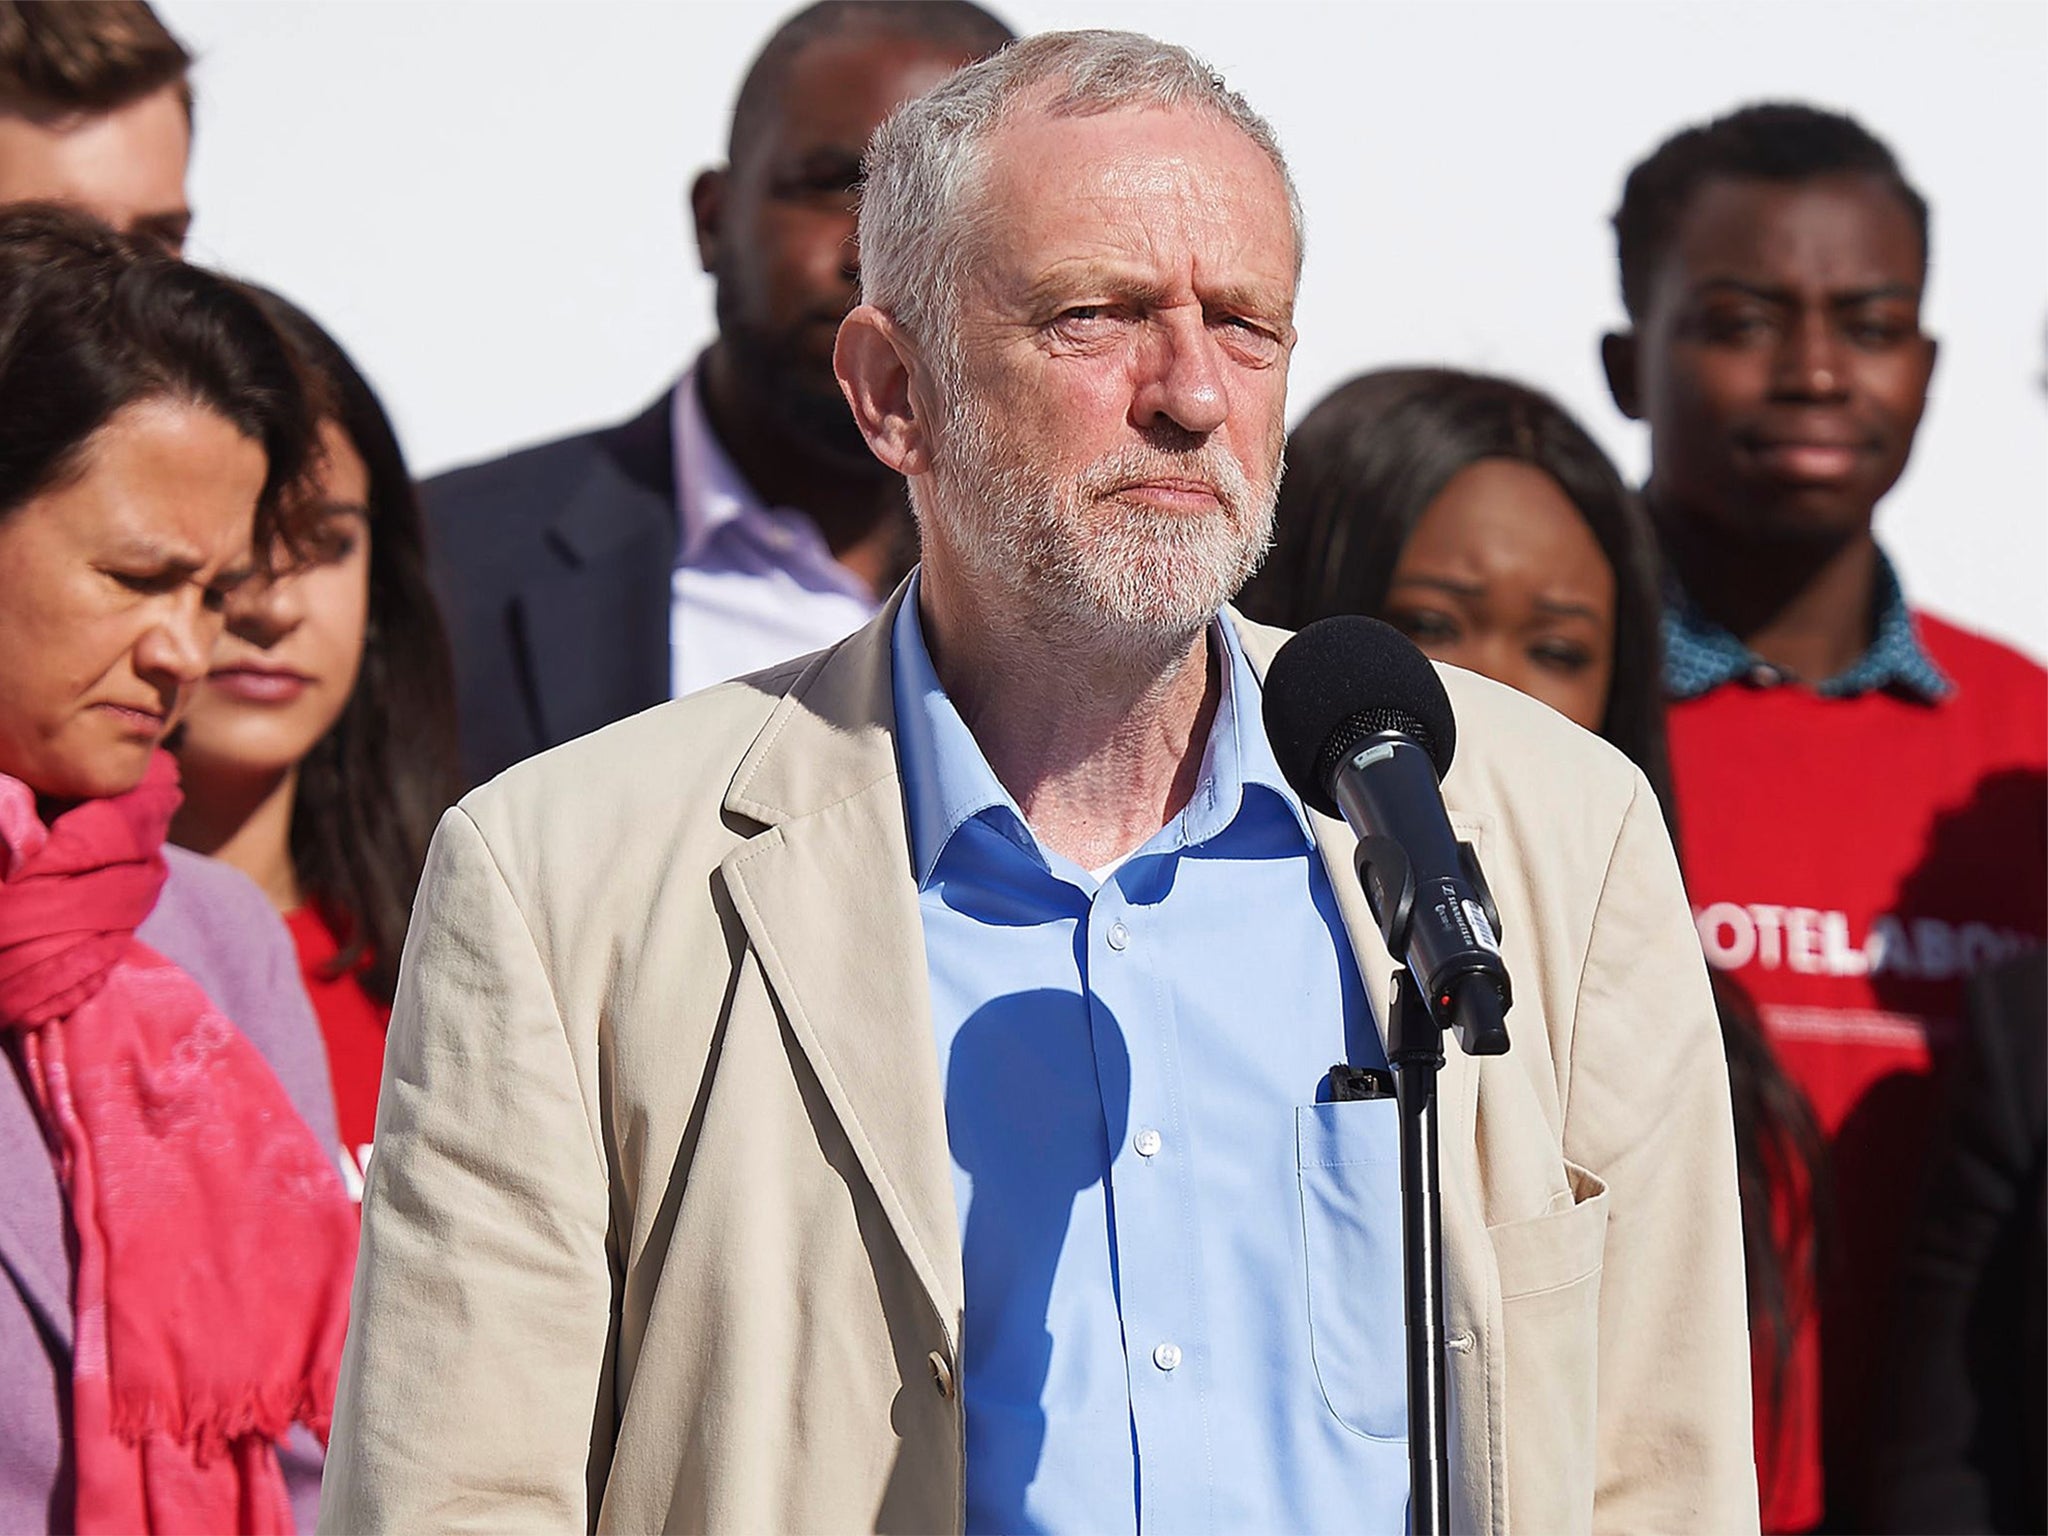 Jeremy Corbyn wrote the letter two years before becoming Labour leader